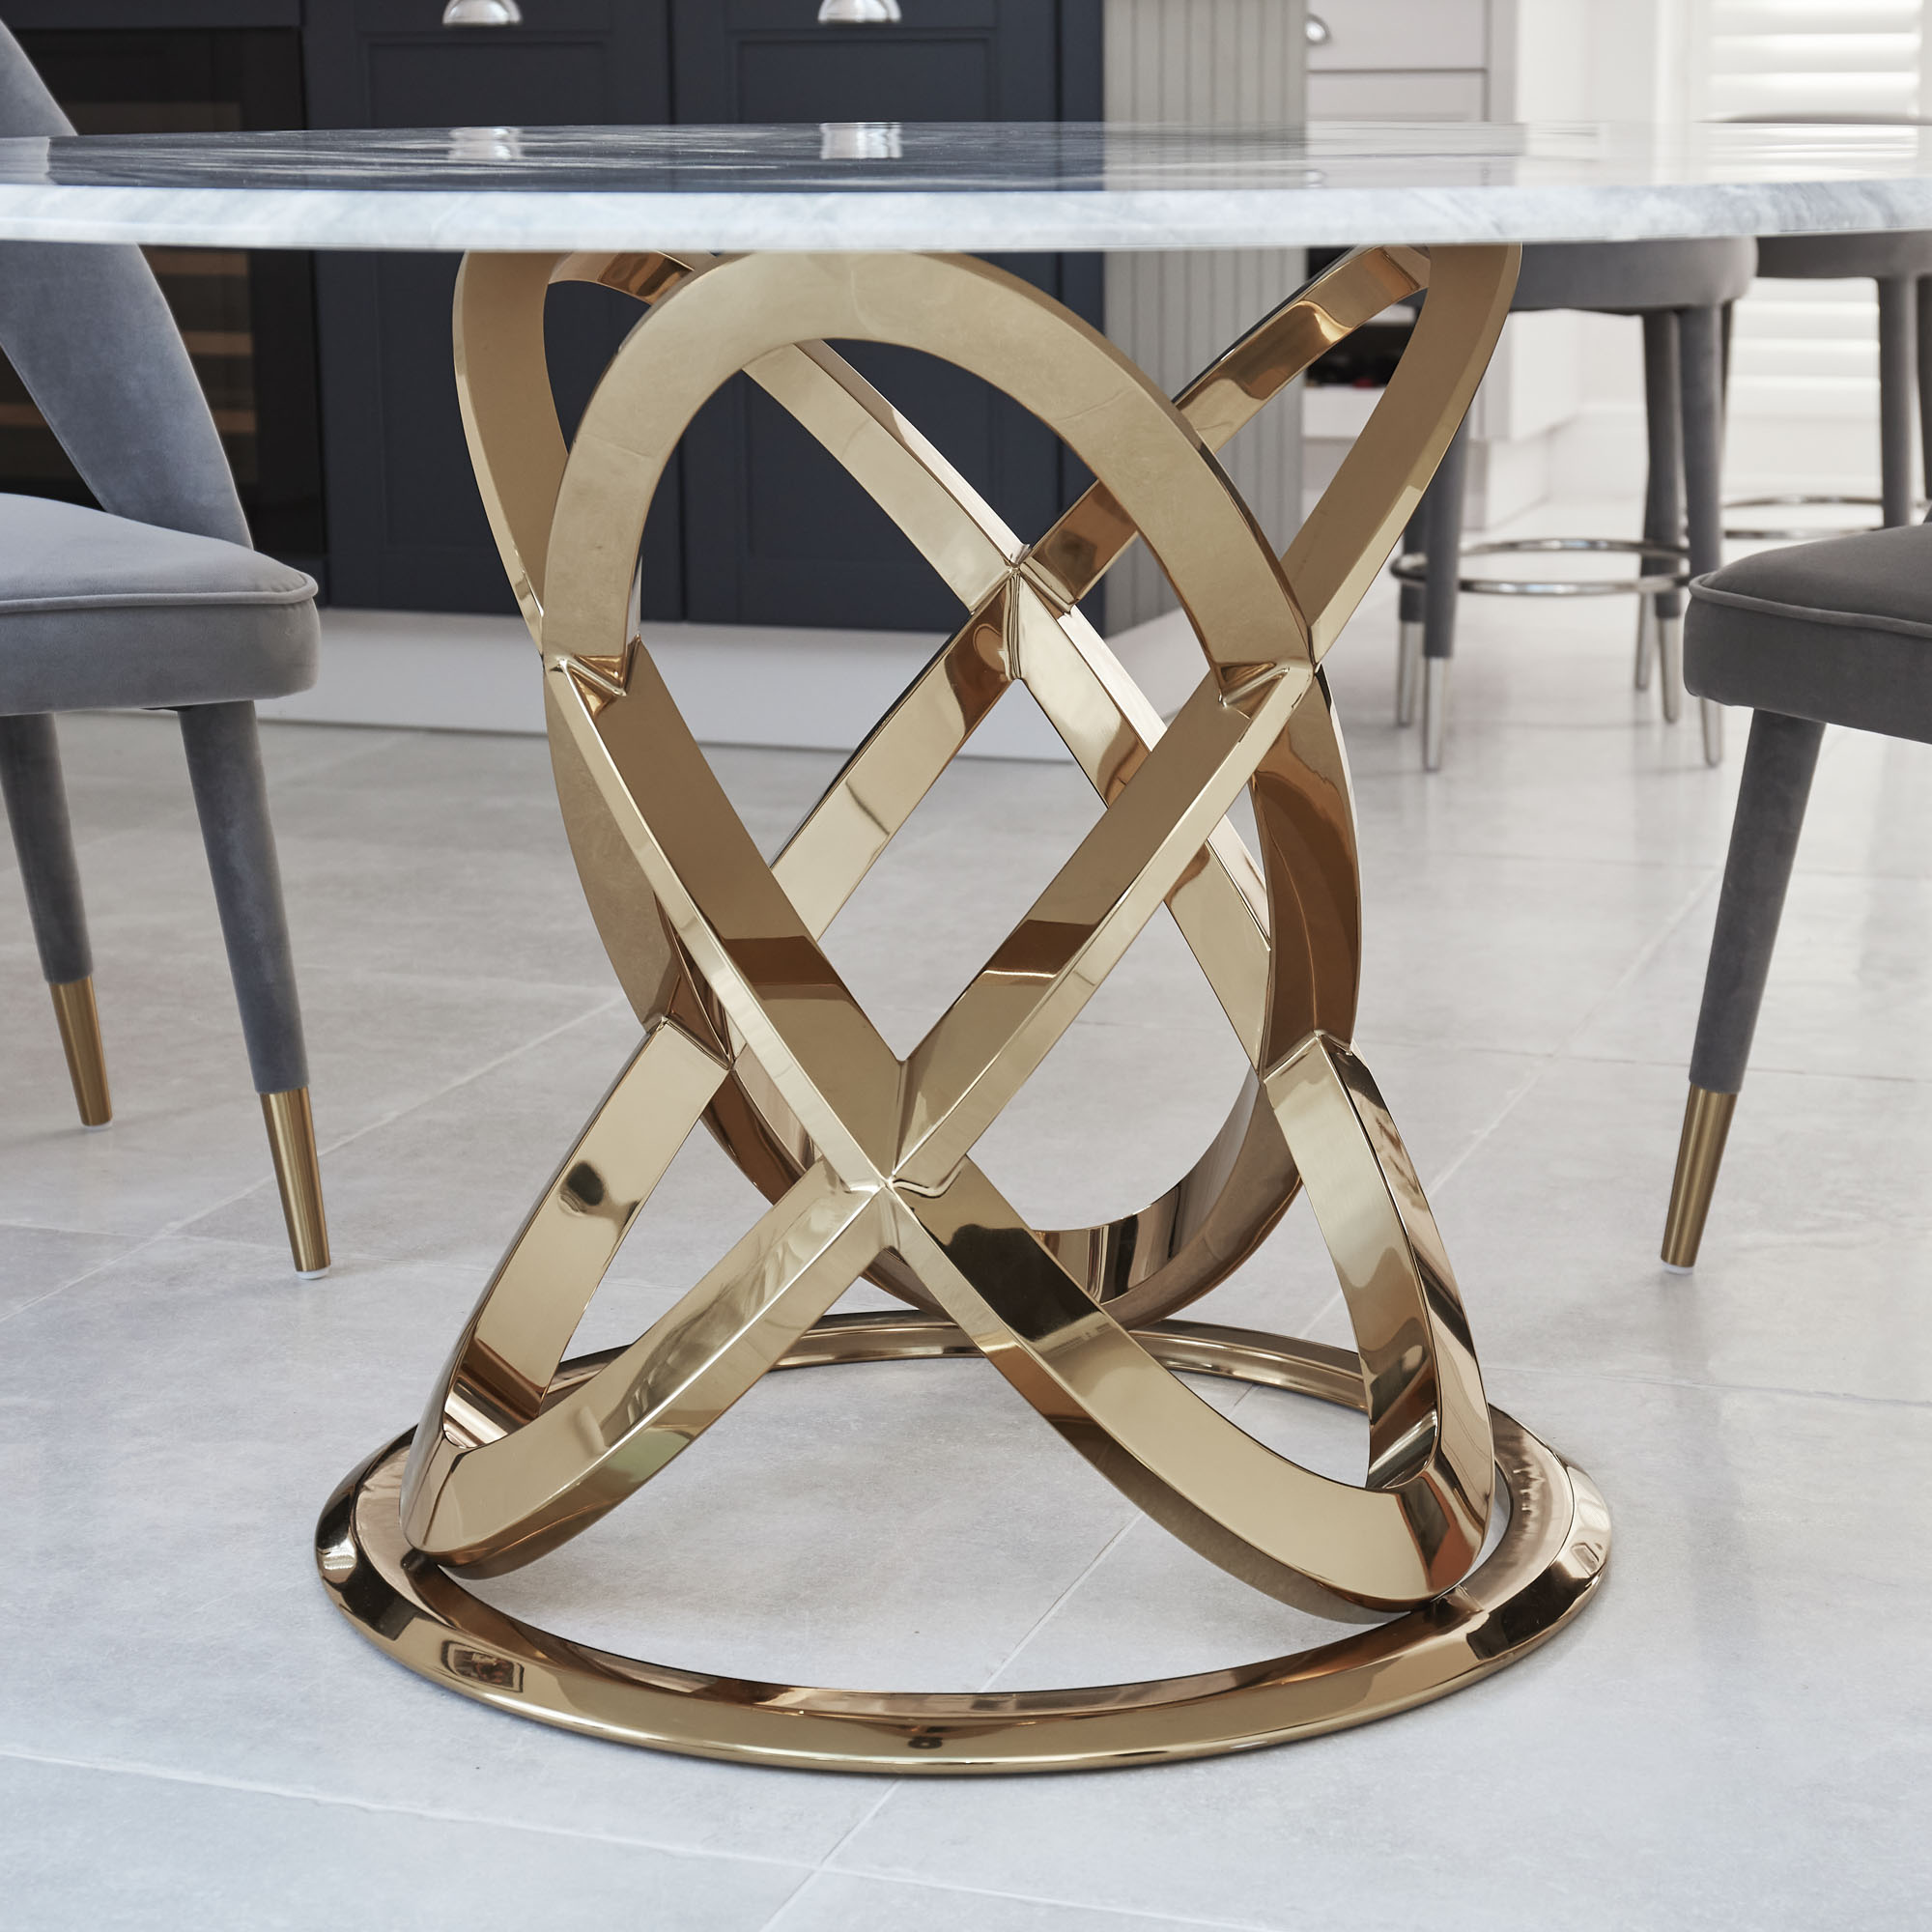 1.3M Circular Pedestal Gold Polished Stainless Steel Dining Table with Grey Marble Effect